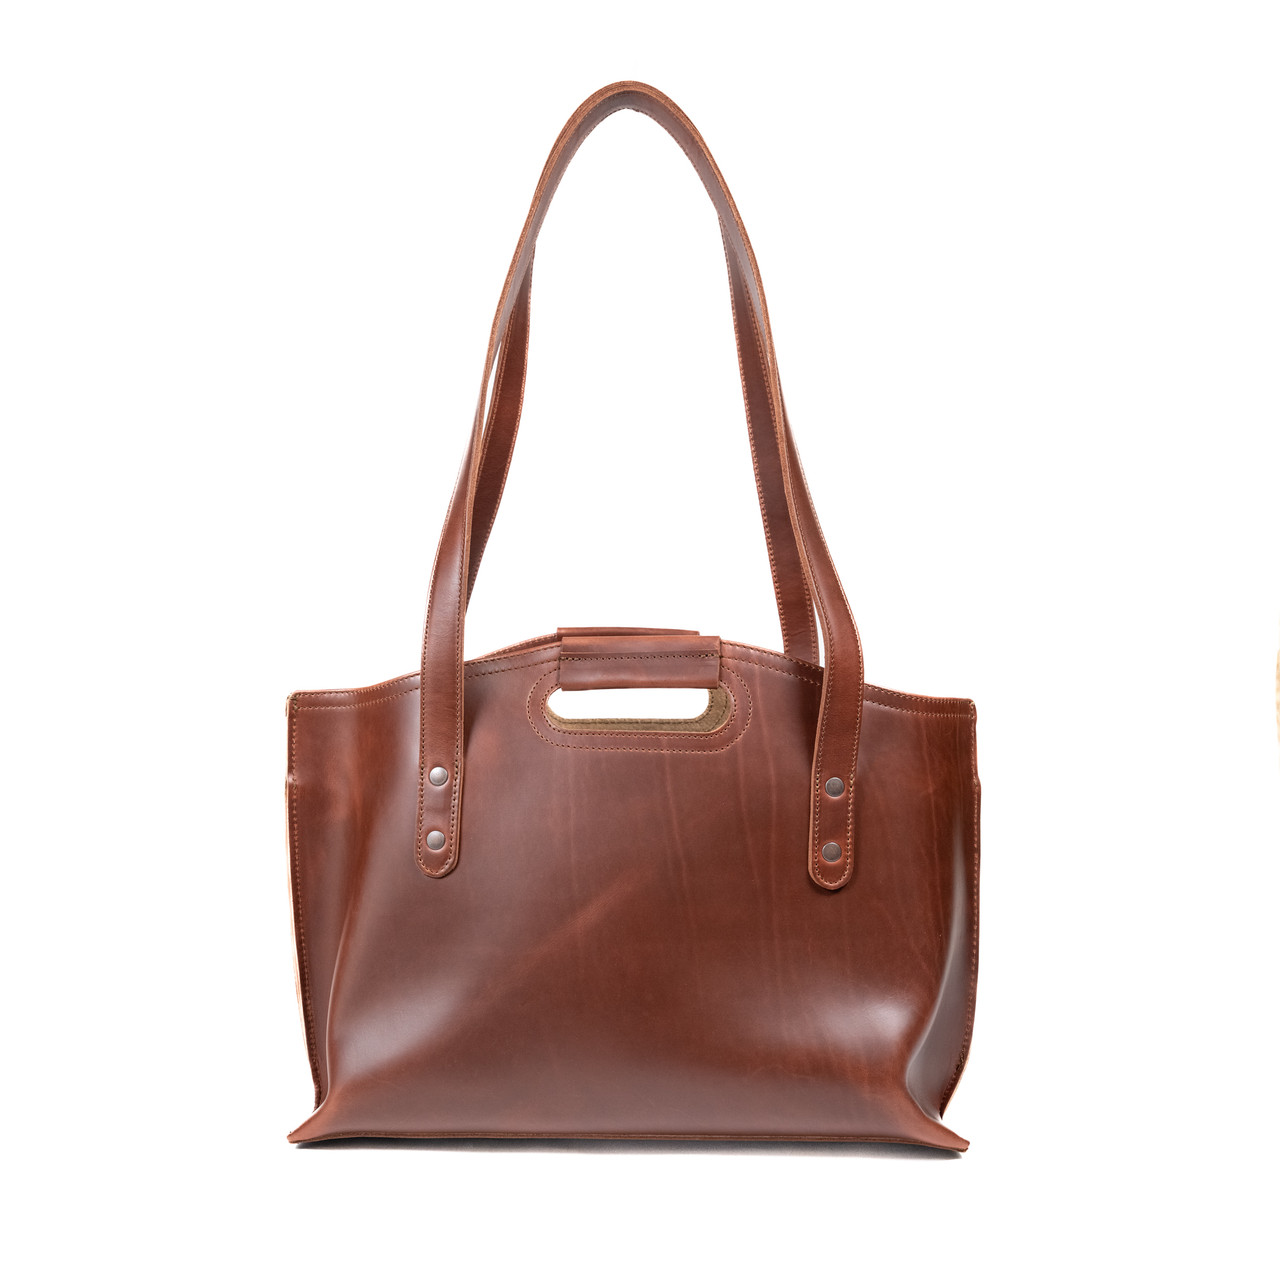 Leather Tote Bag, A Quality Purse to Hand Down